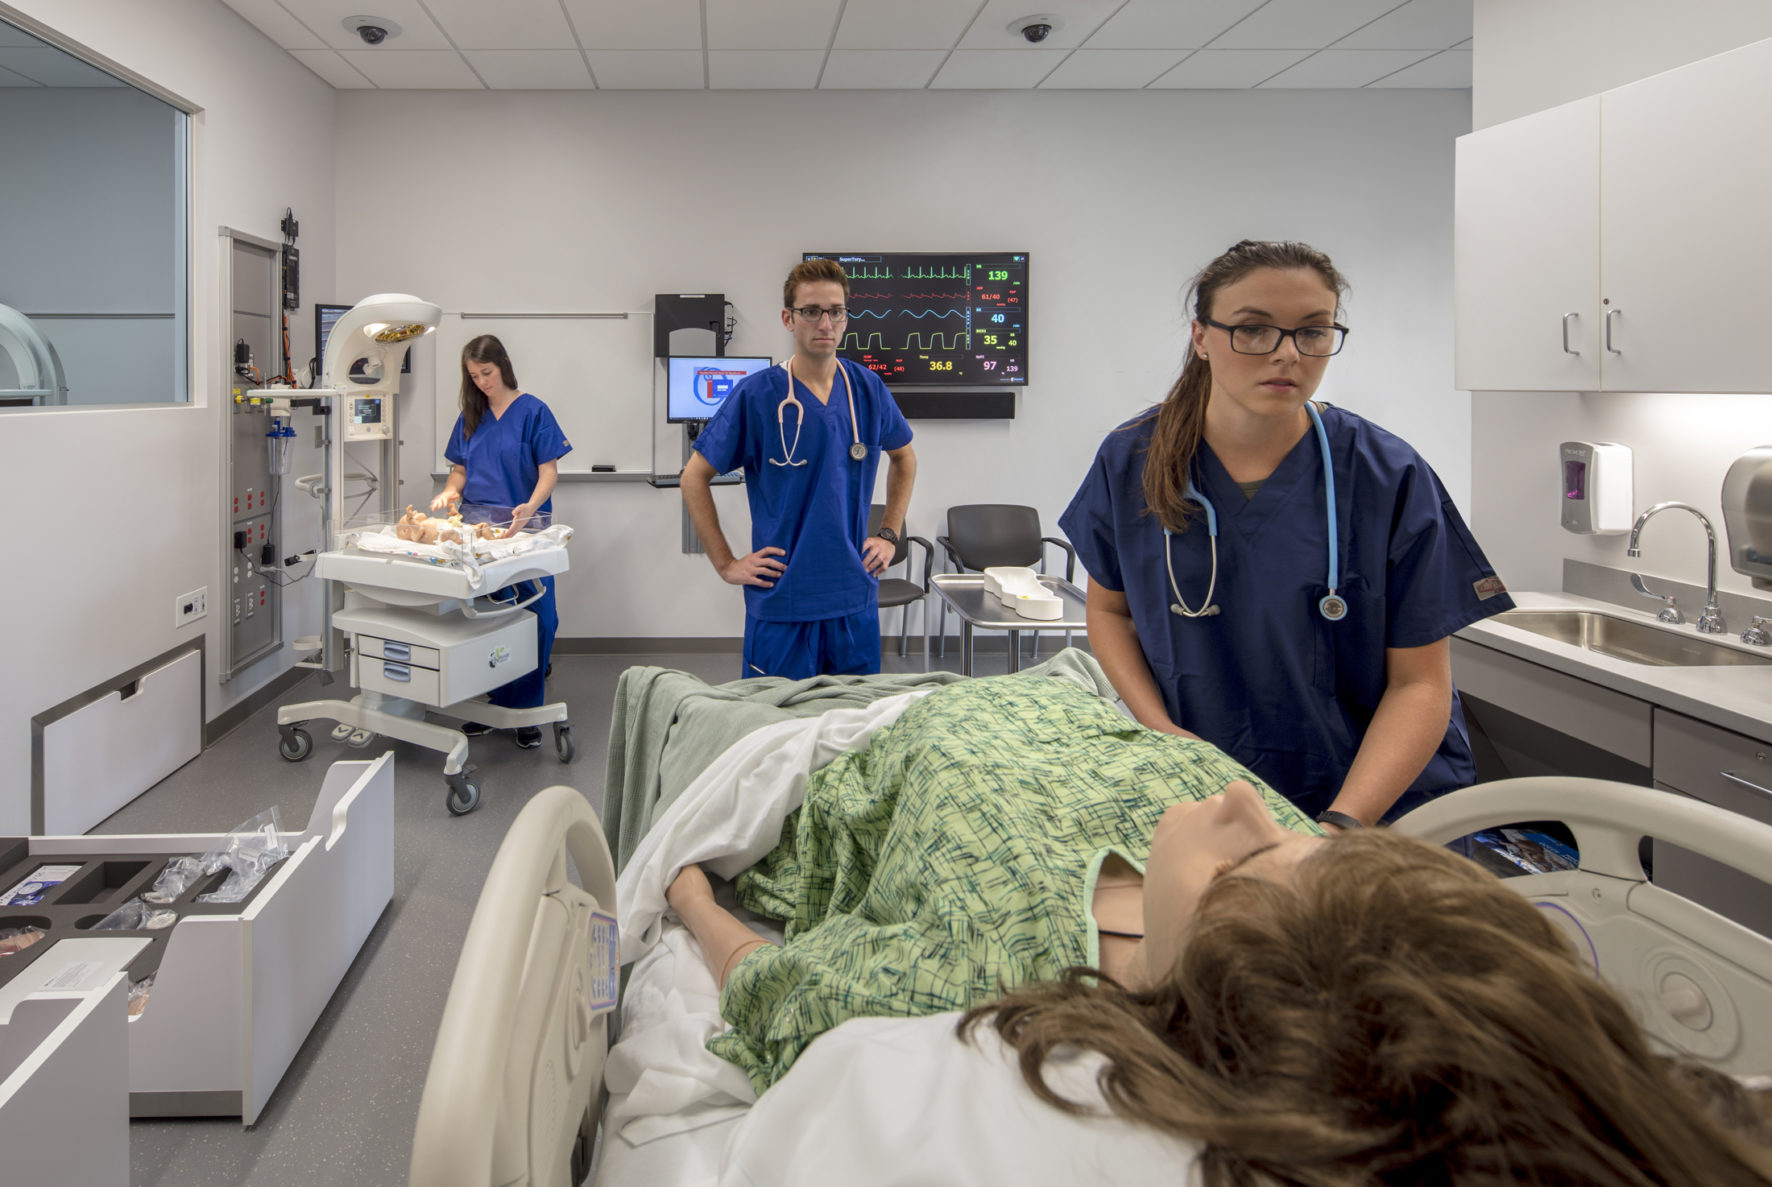 KU medical students working in a simulation lab